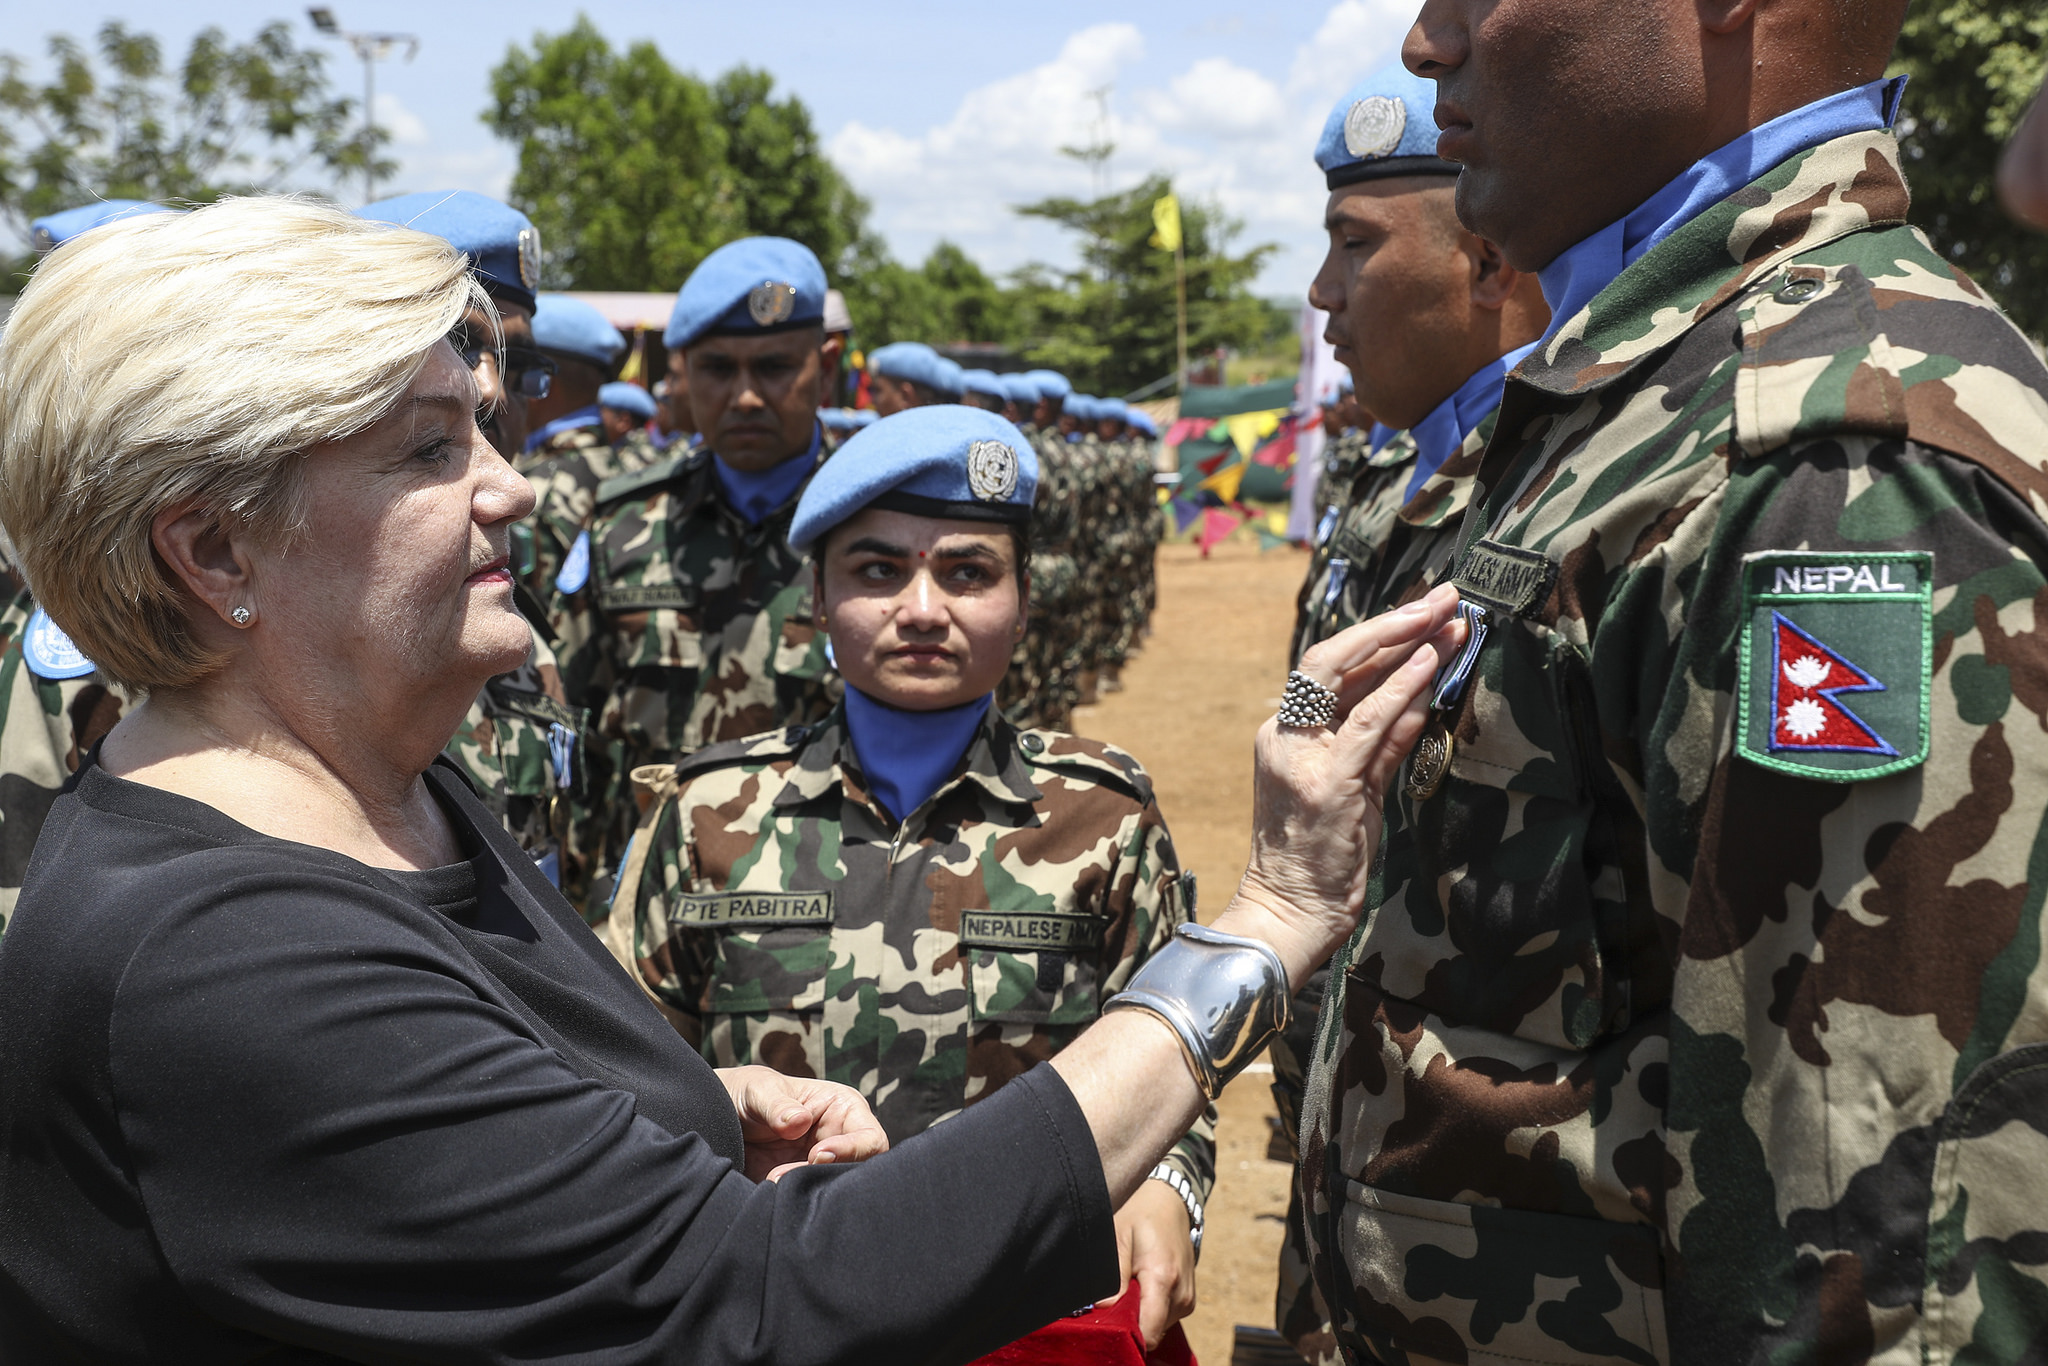 Nepal emerges as the largest troop contributor to UN peacekeeping missions